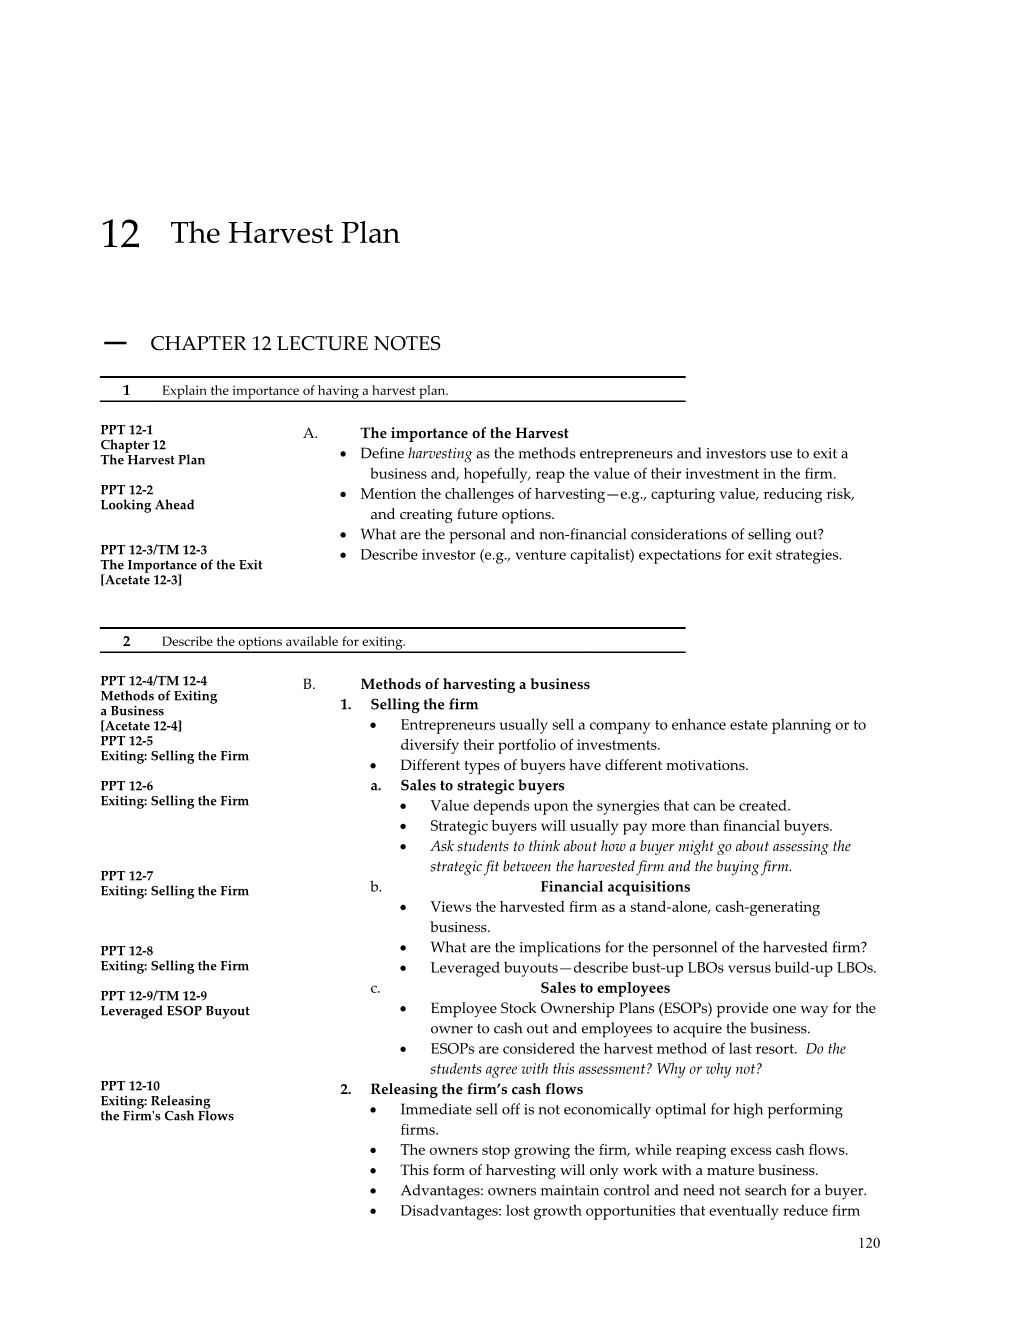 Chapter 12 the Harvest Plan1